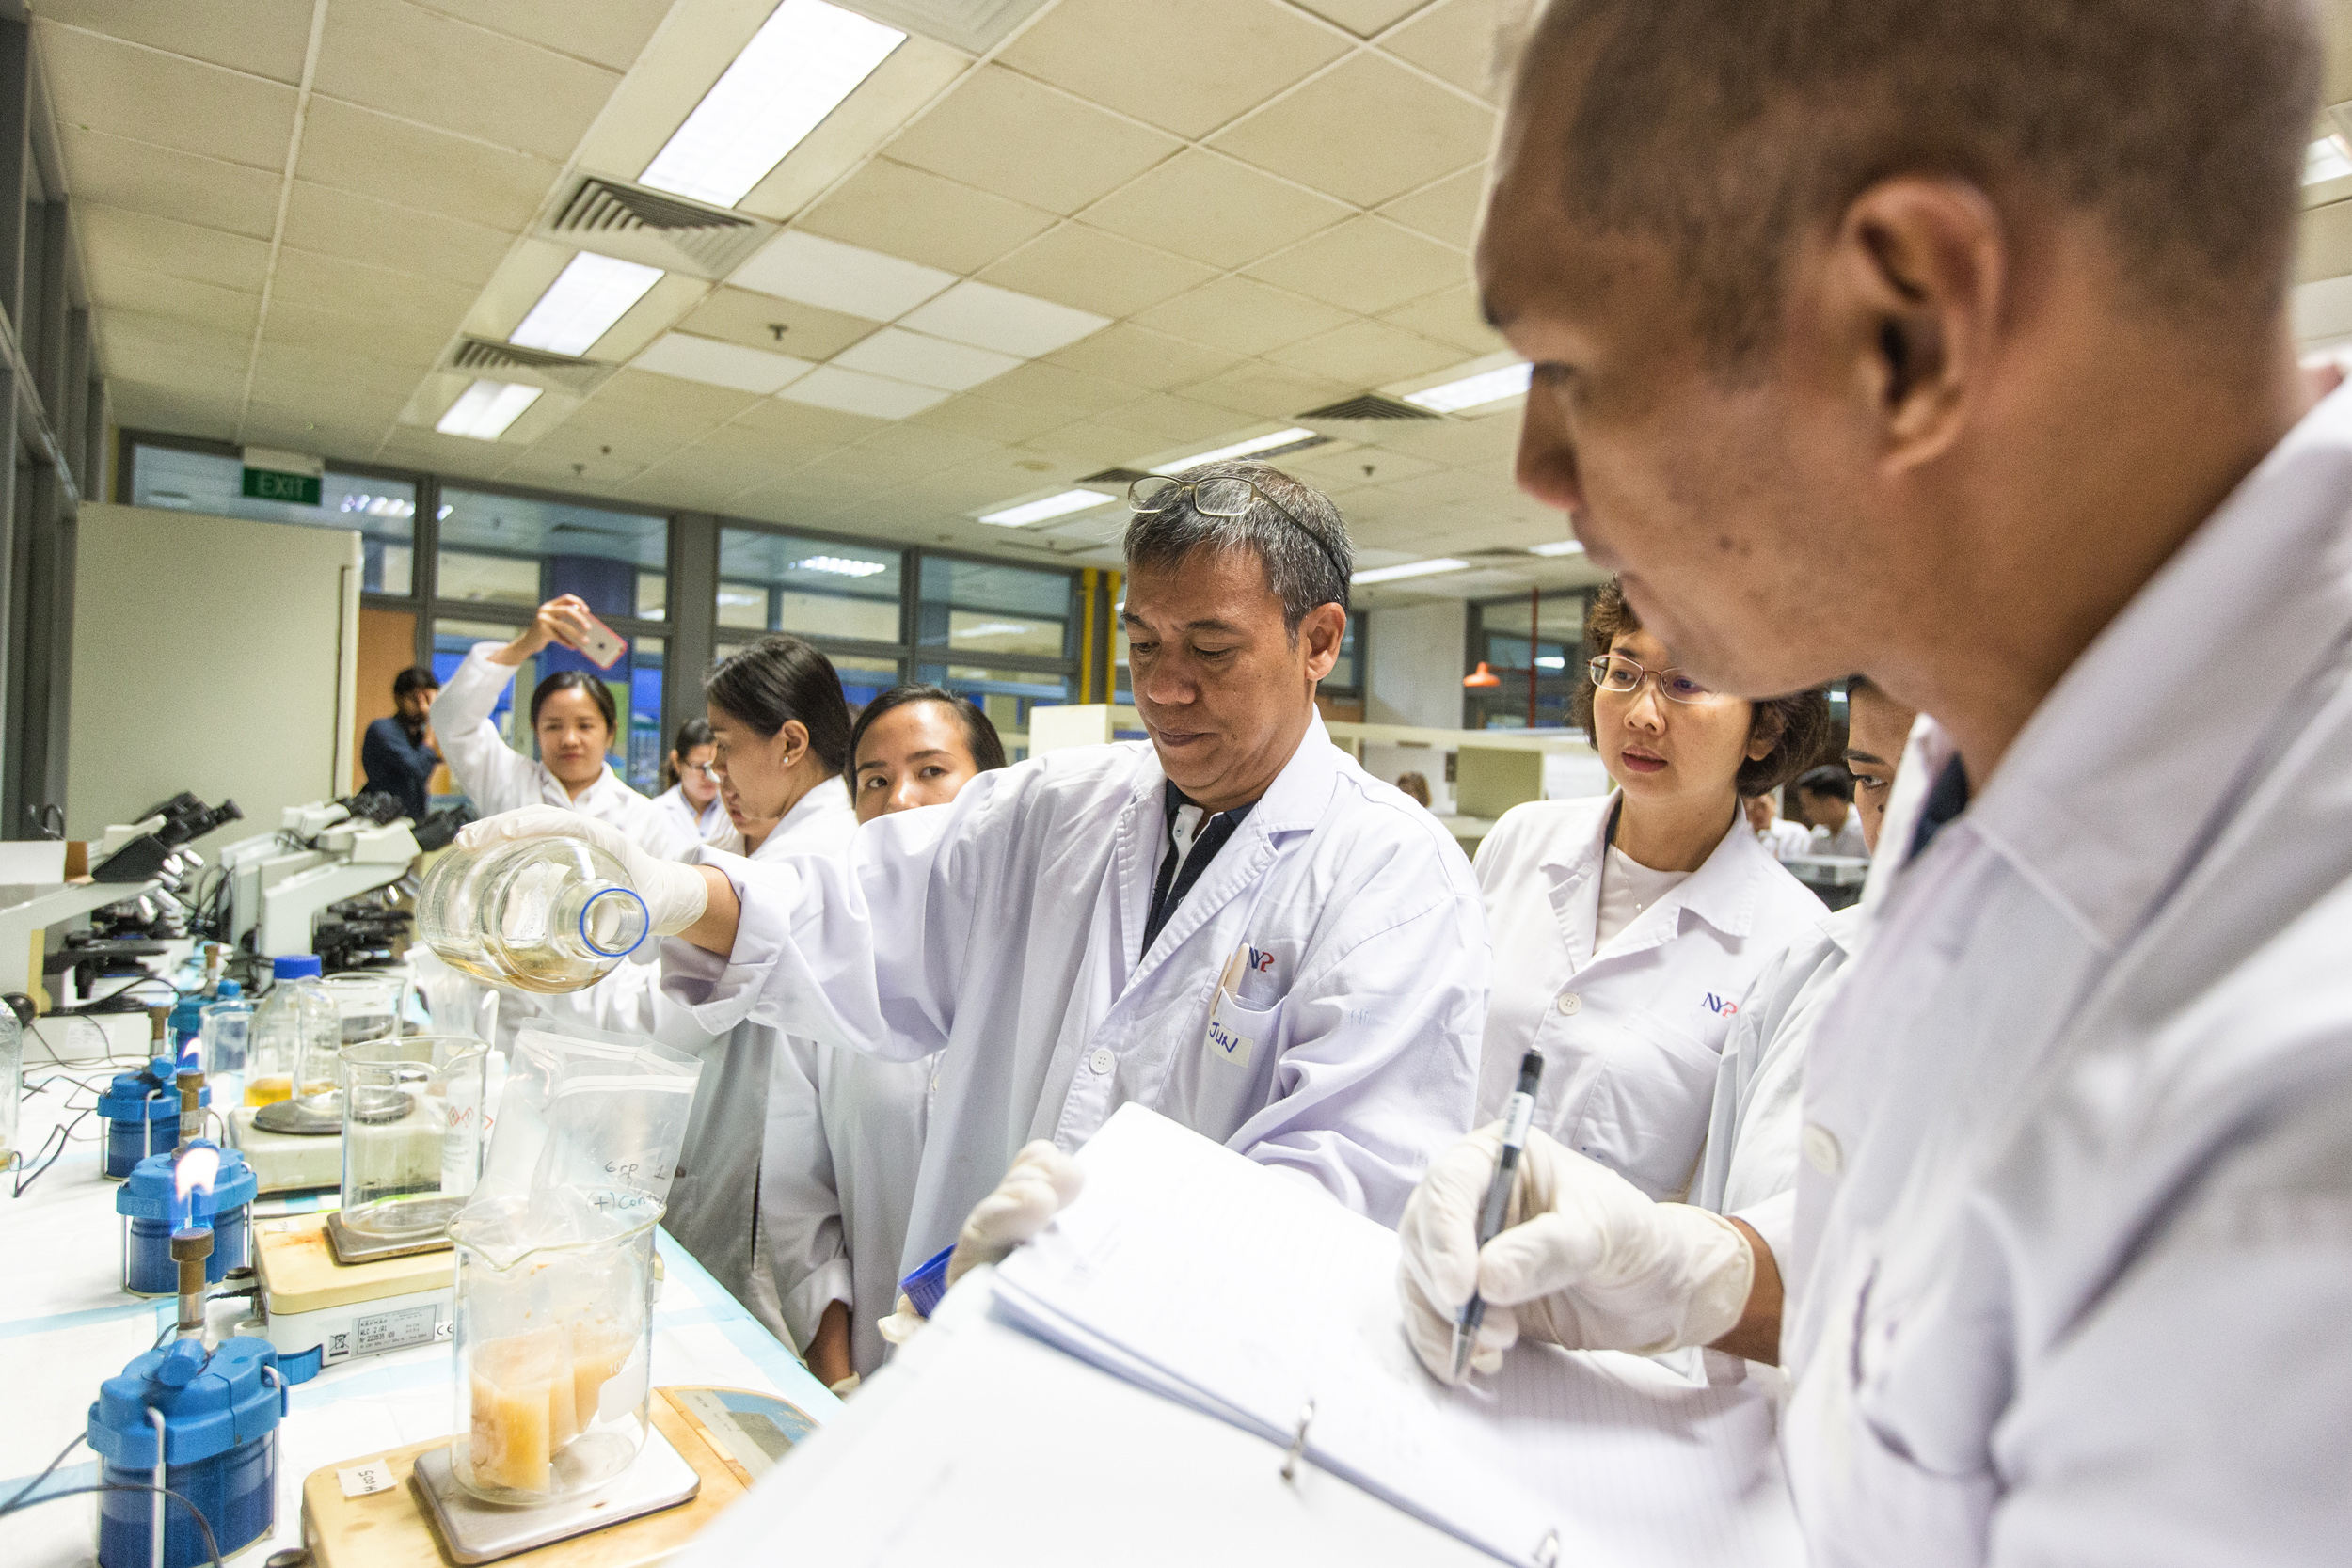  Jun Leo (centre) pours in the milk samples to its specific amount for microbiology testing. Other samples that are used for testing include salads and raw seafood-based foods. 